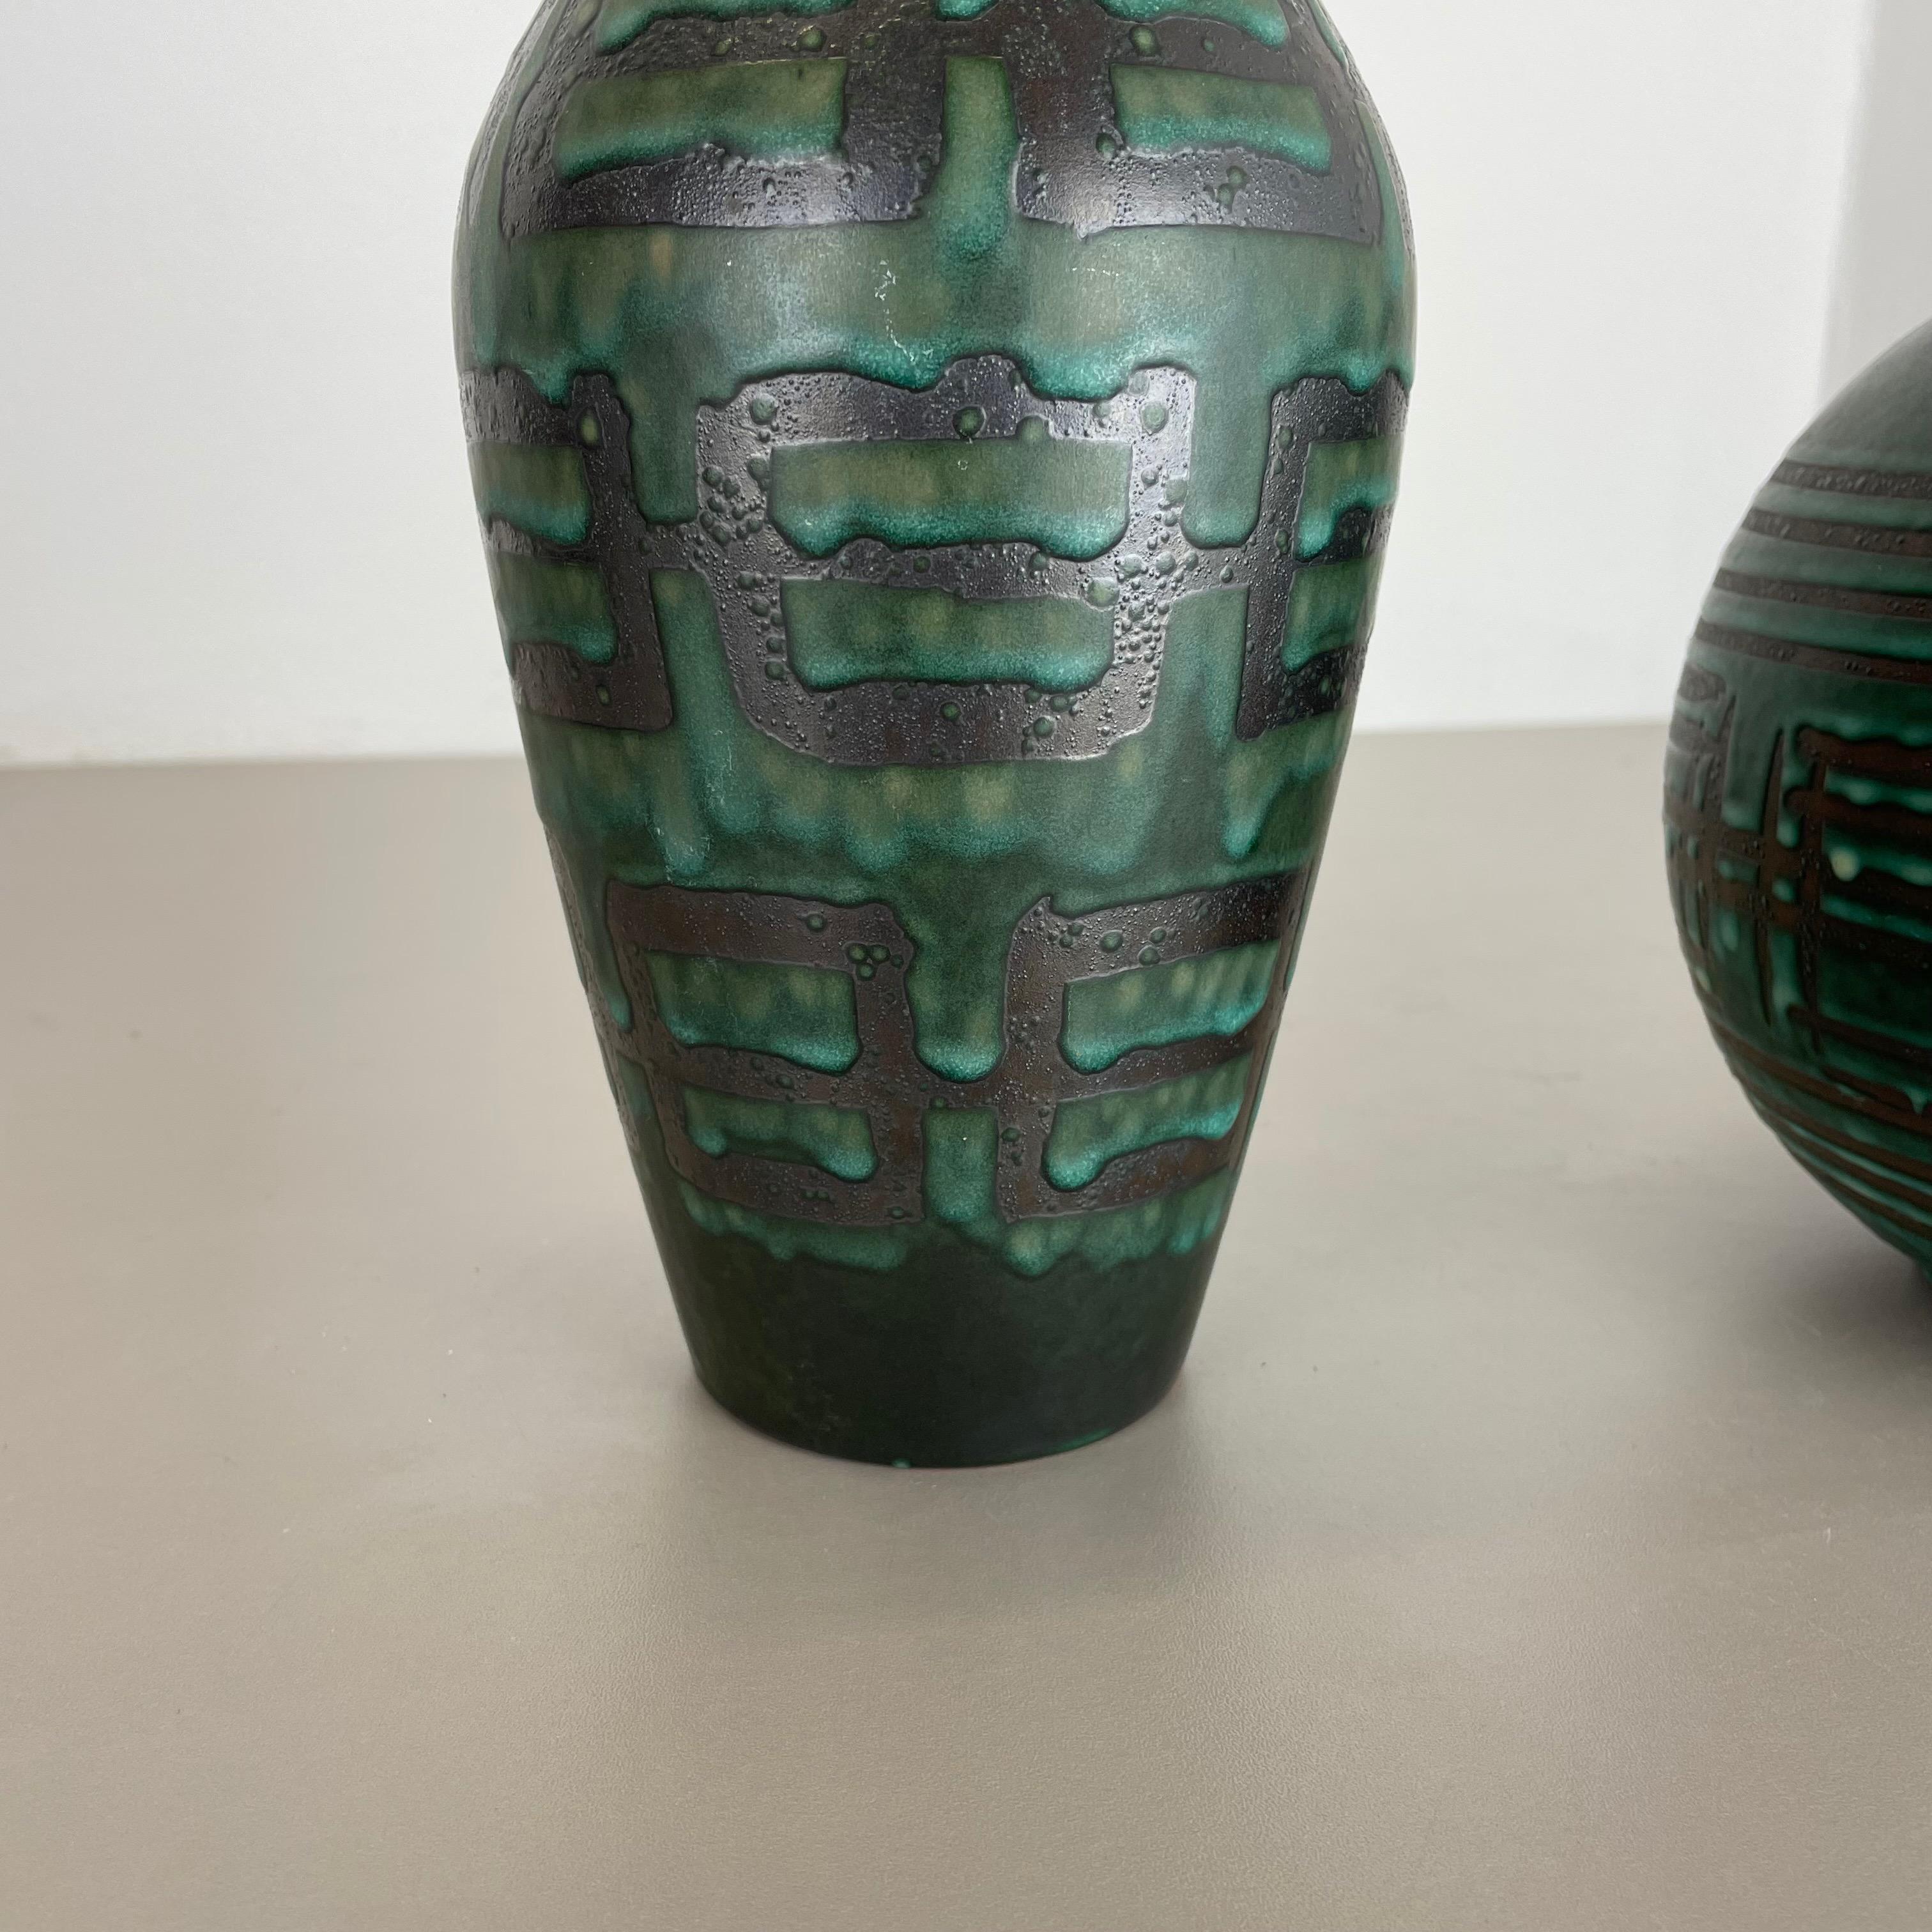 20th Century Set of 2 Fat Lava Pottery Vases Heinz Siery Carstens Tönnieshof, Germany, 1970s For Sale